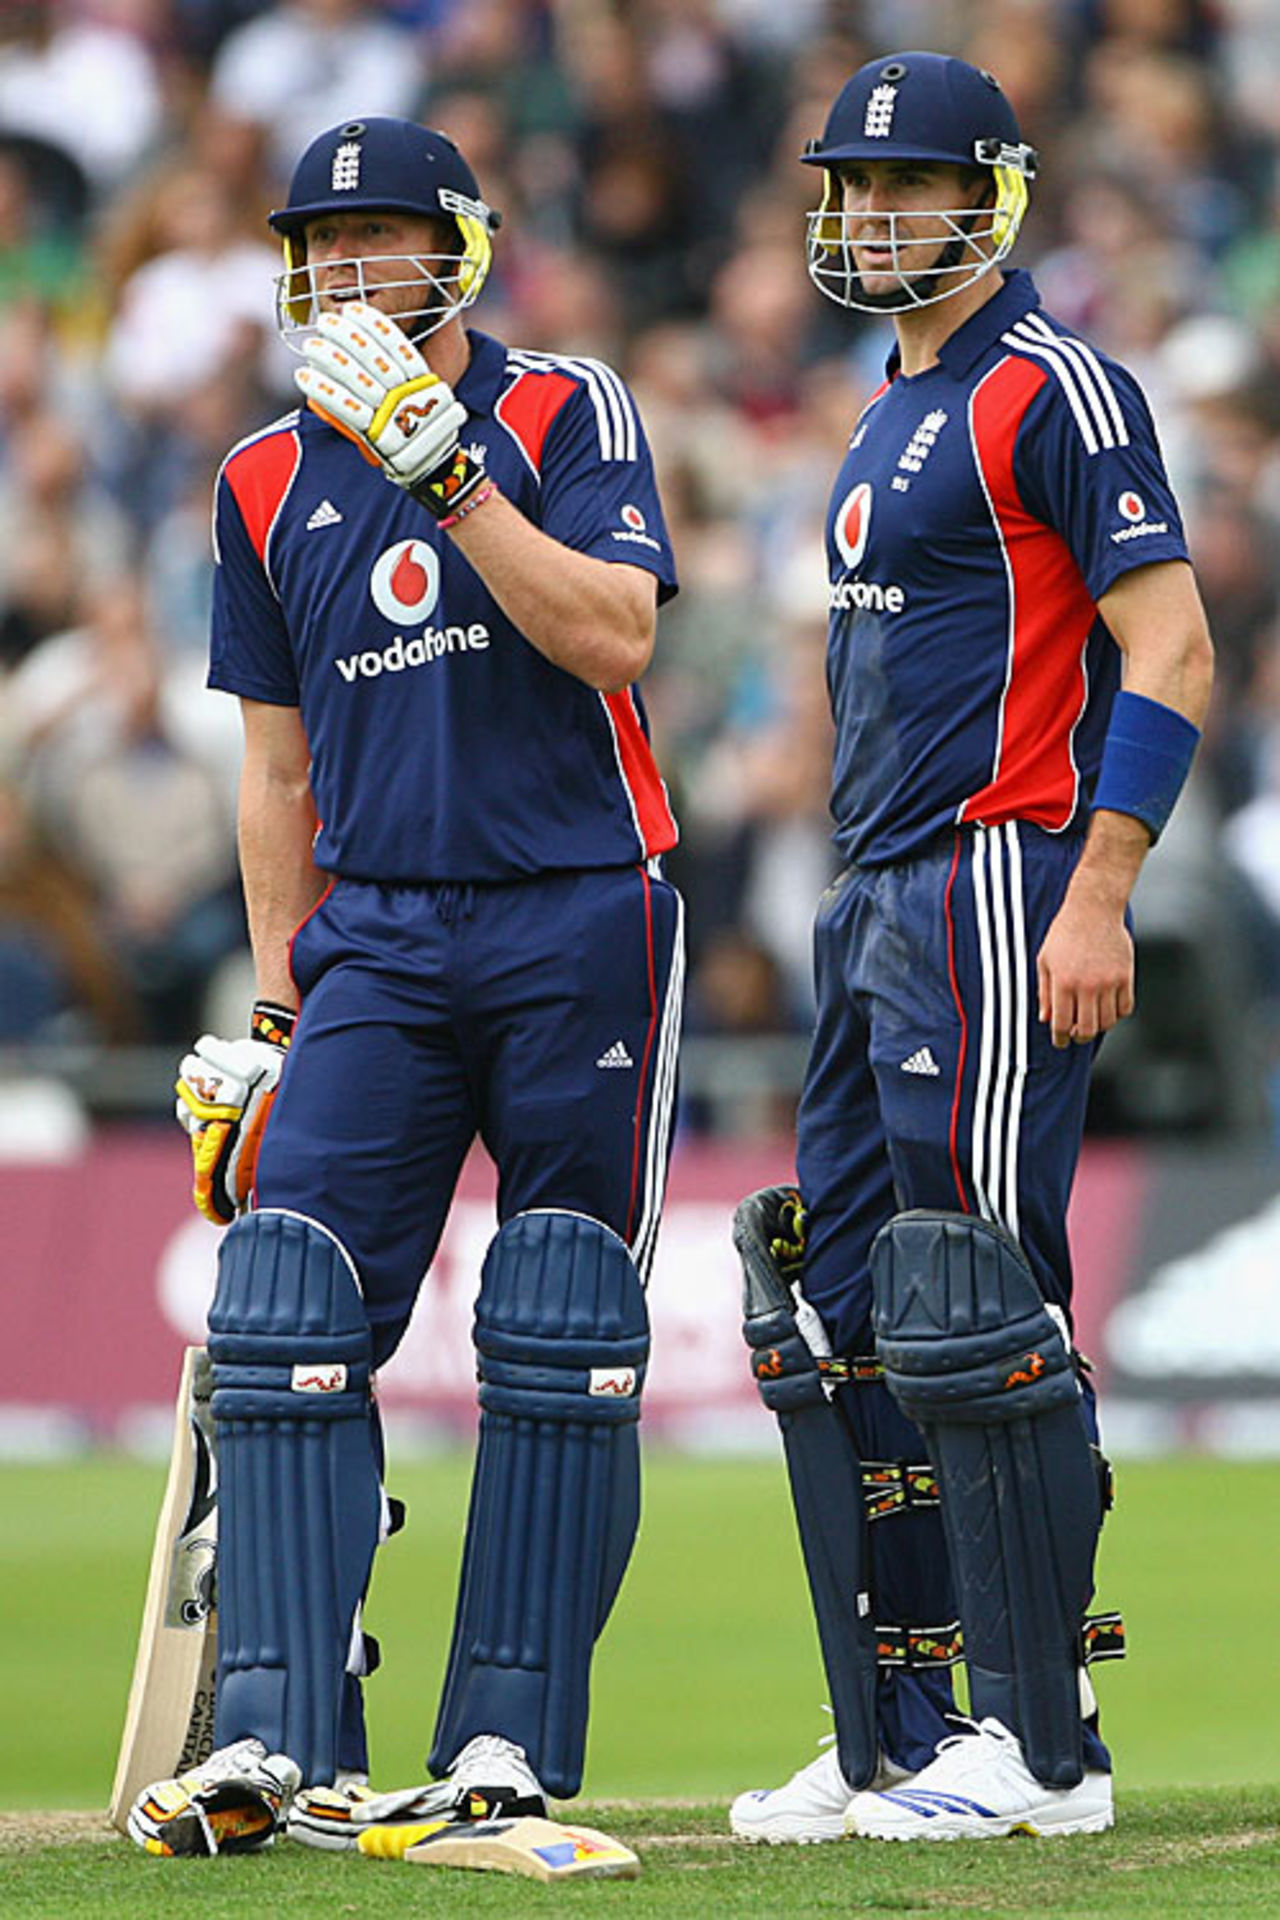 Andrew Flintoff and Kevin Pietersen take a breather during their hundred partnership, England v South Africa, 1st ODI, Headingley, August 22, 2008